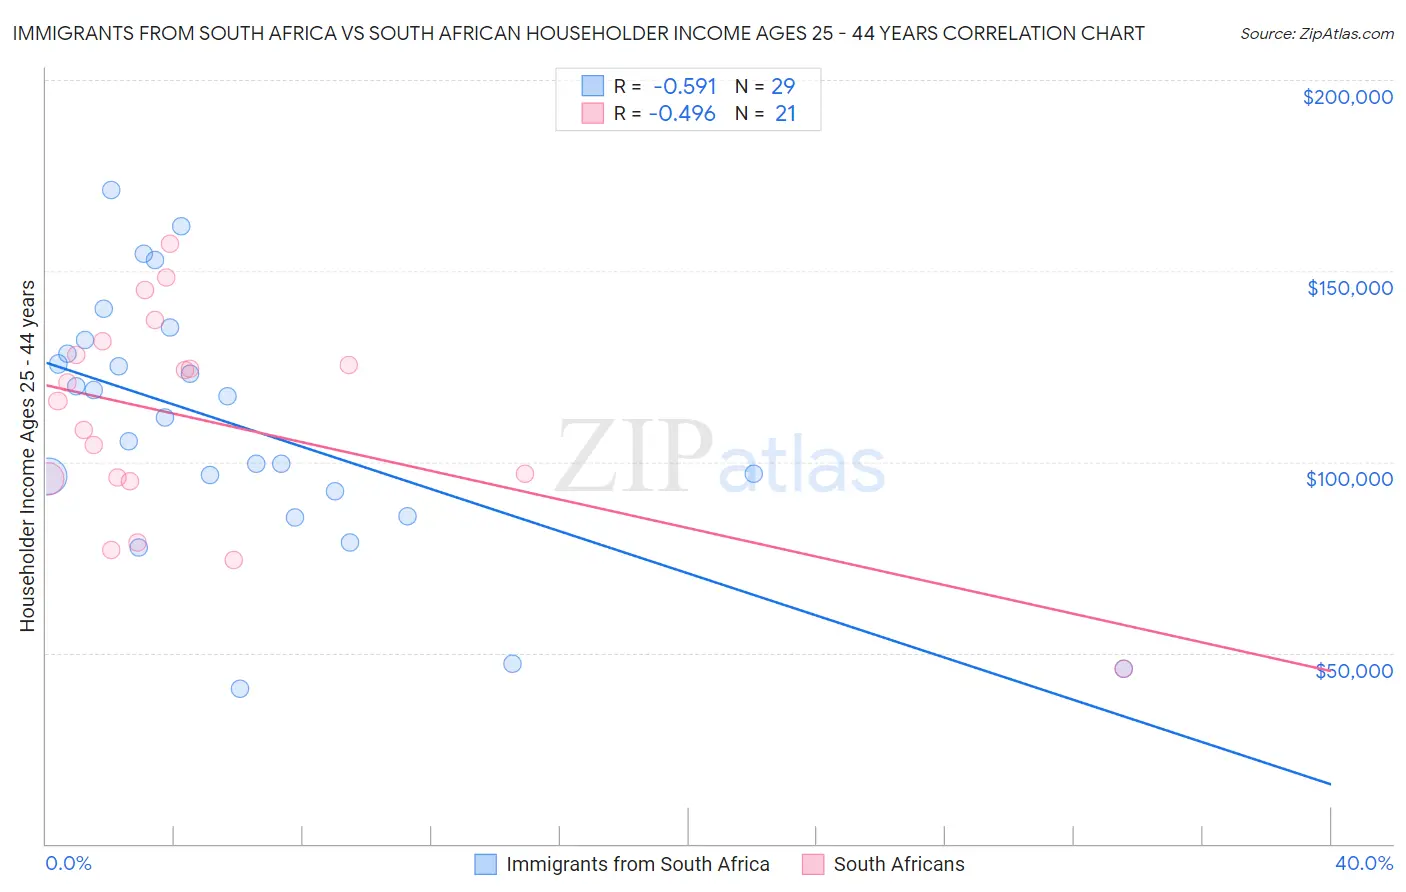 Immigrants from South Africa vs South African Householder Income Ages 25 - 44 years